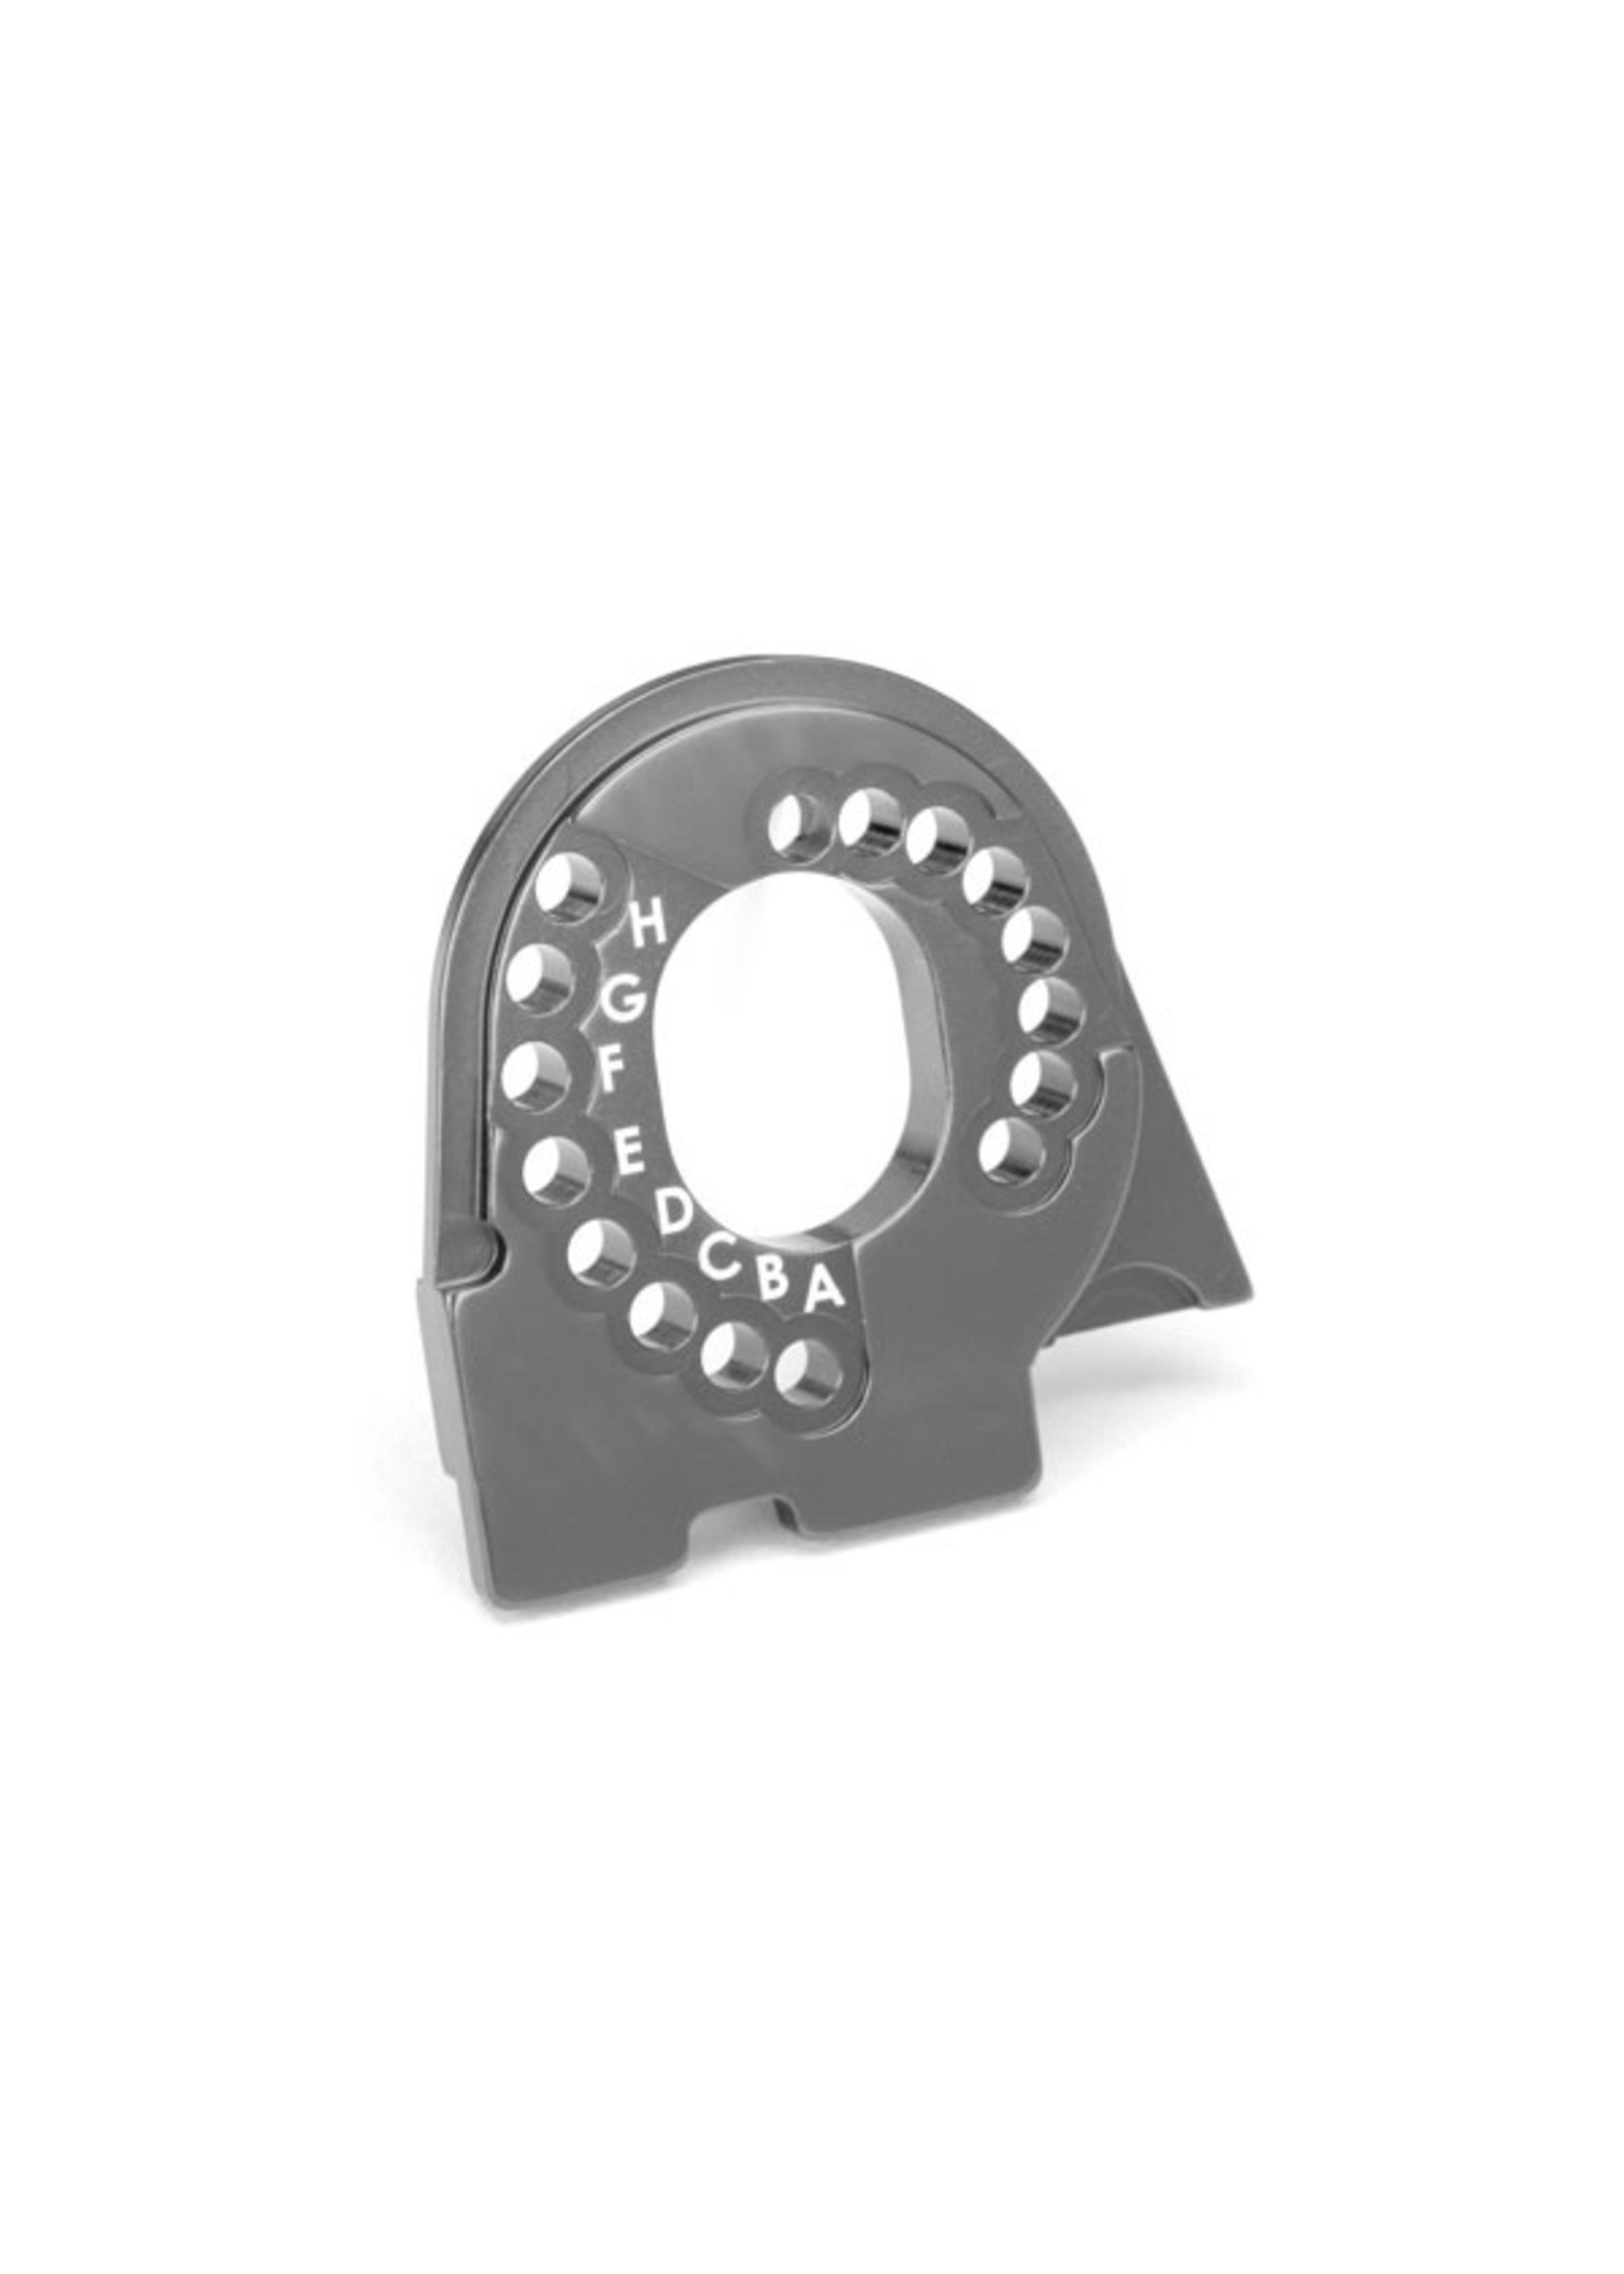 Traxxas 8290A - Motor Mount Plate for TRX-4 - Gray